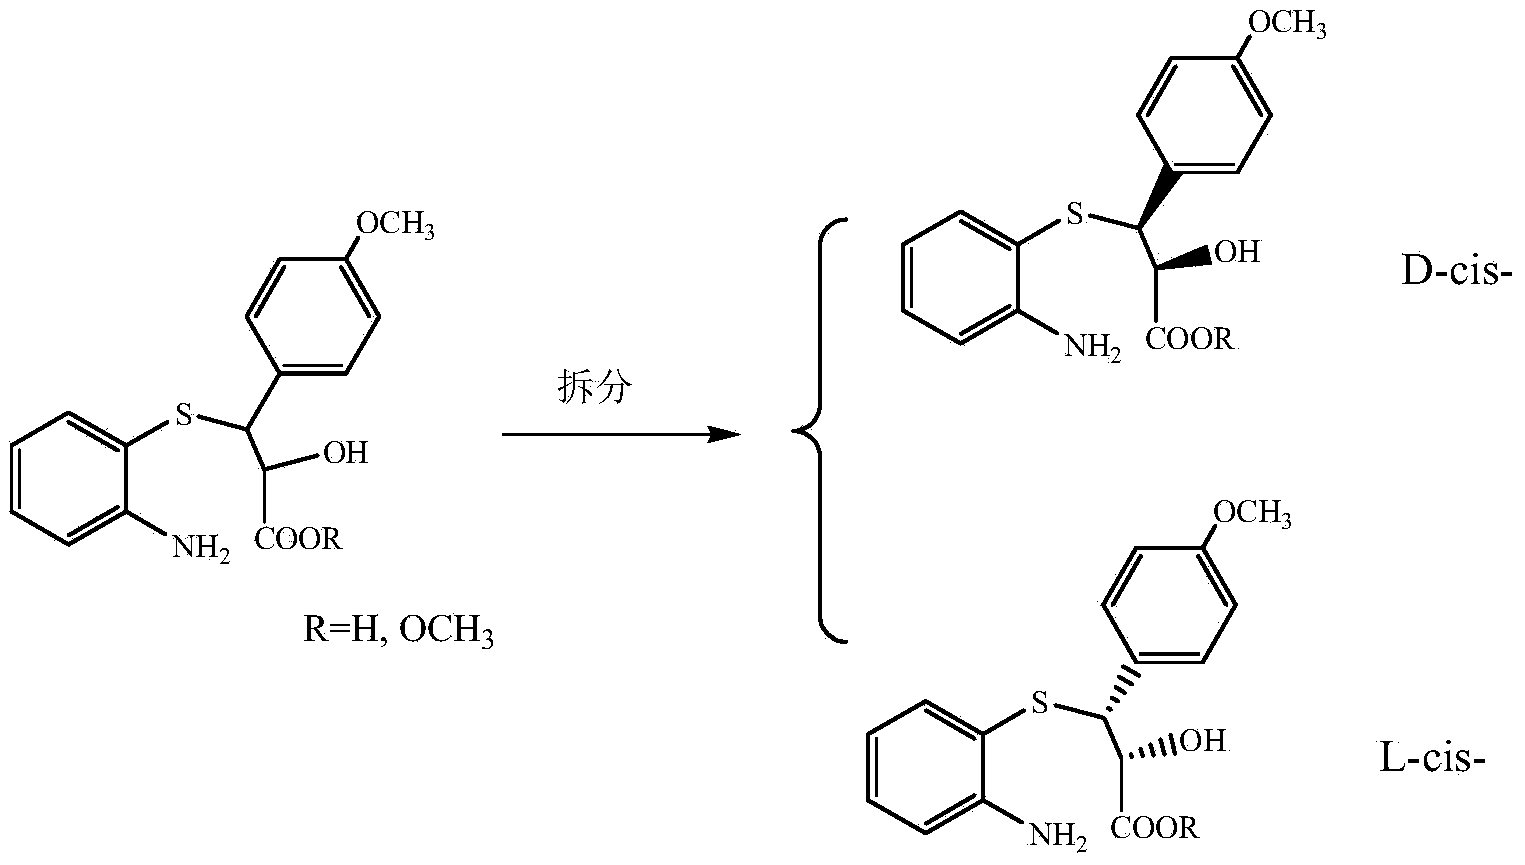 Process for recycling L-cis-lactam as diltiazem intermediate by-product